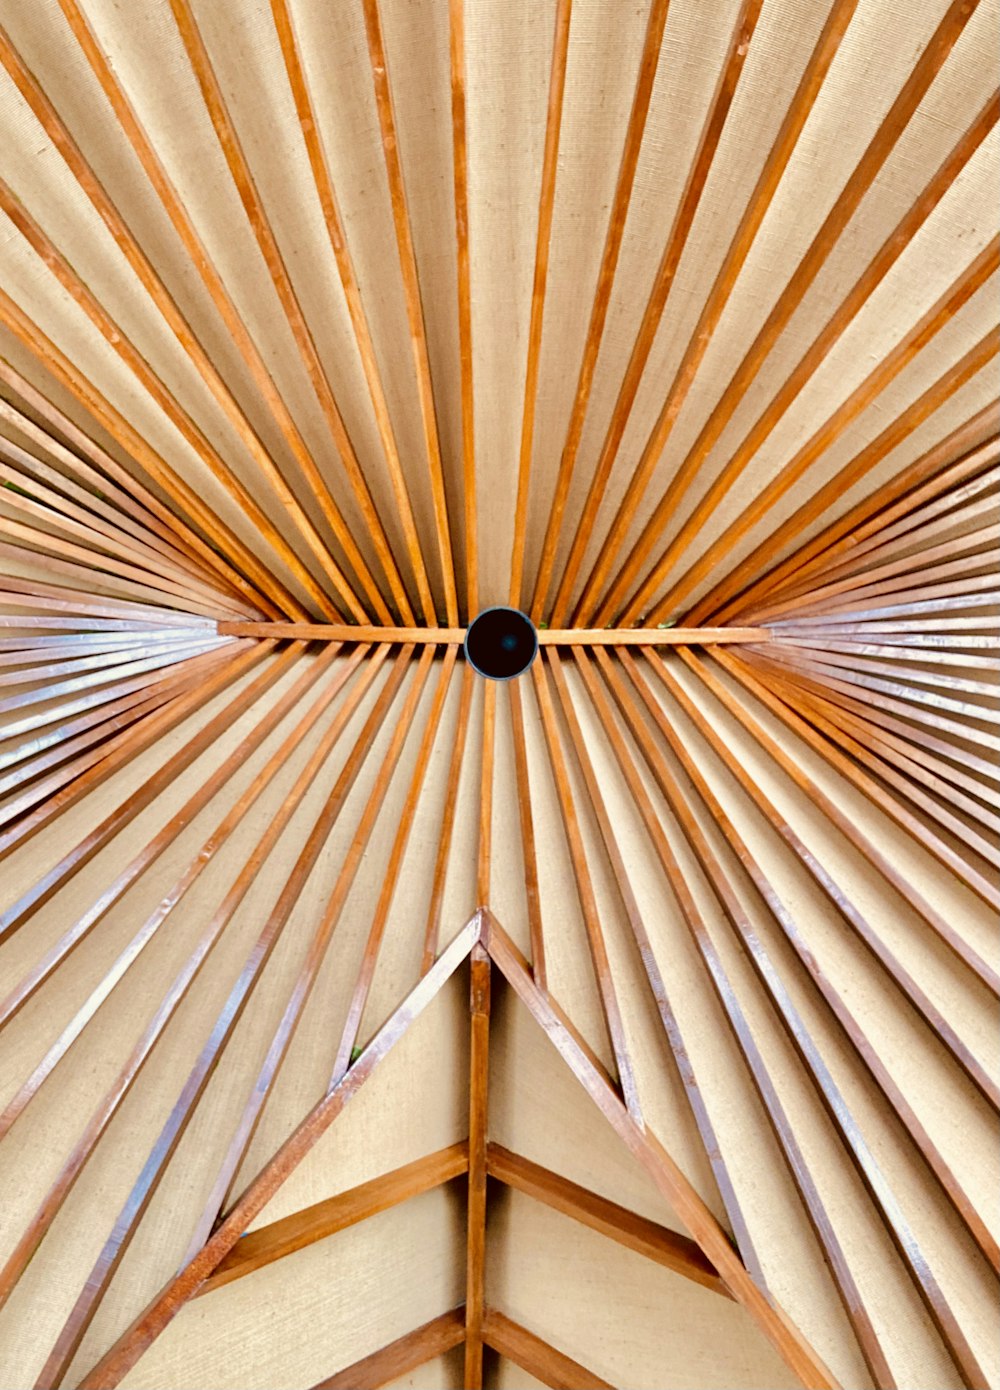 a close up of a ceiling made of wood